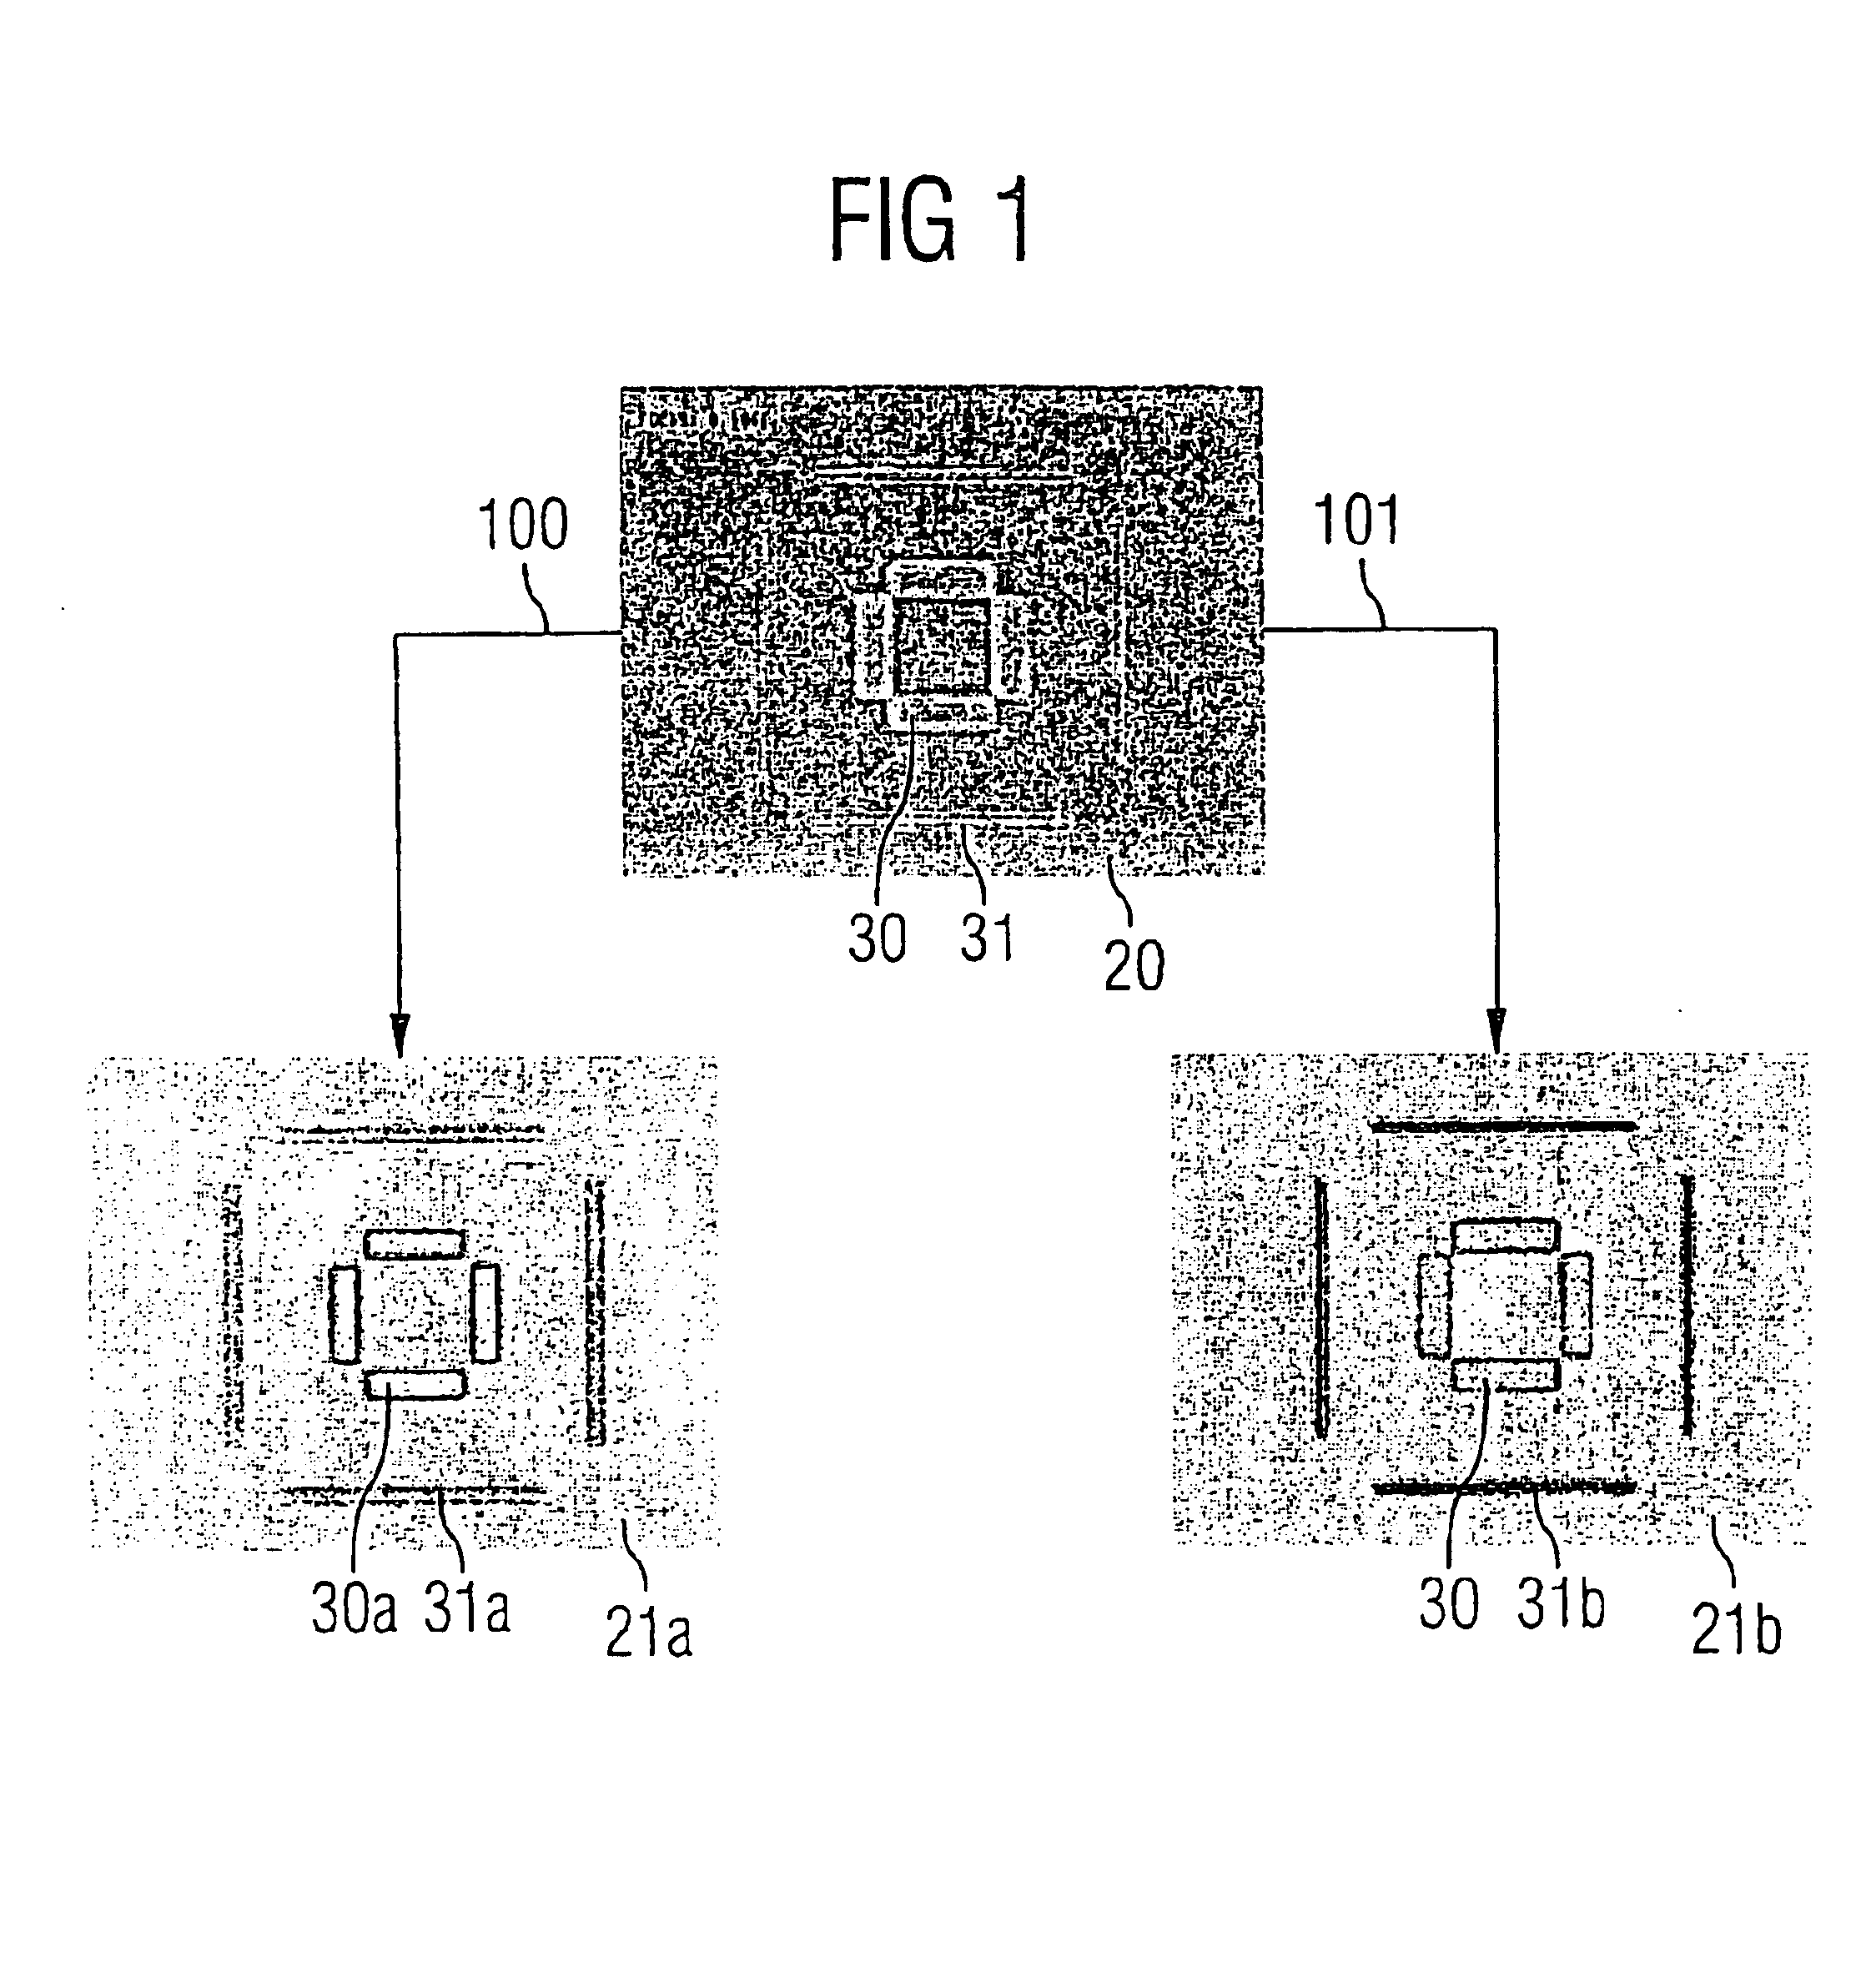 Method for performing an alignment measurement of two patterns in different layers on a semiconductor wafer